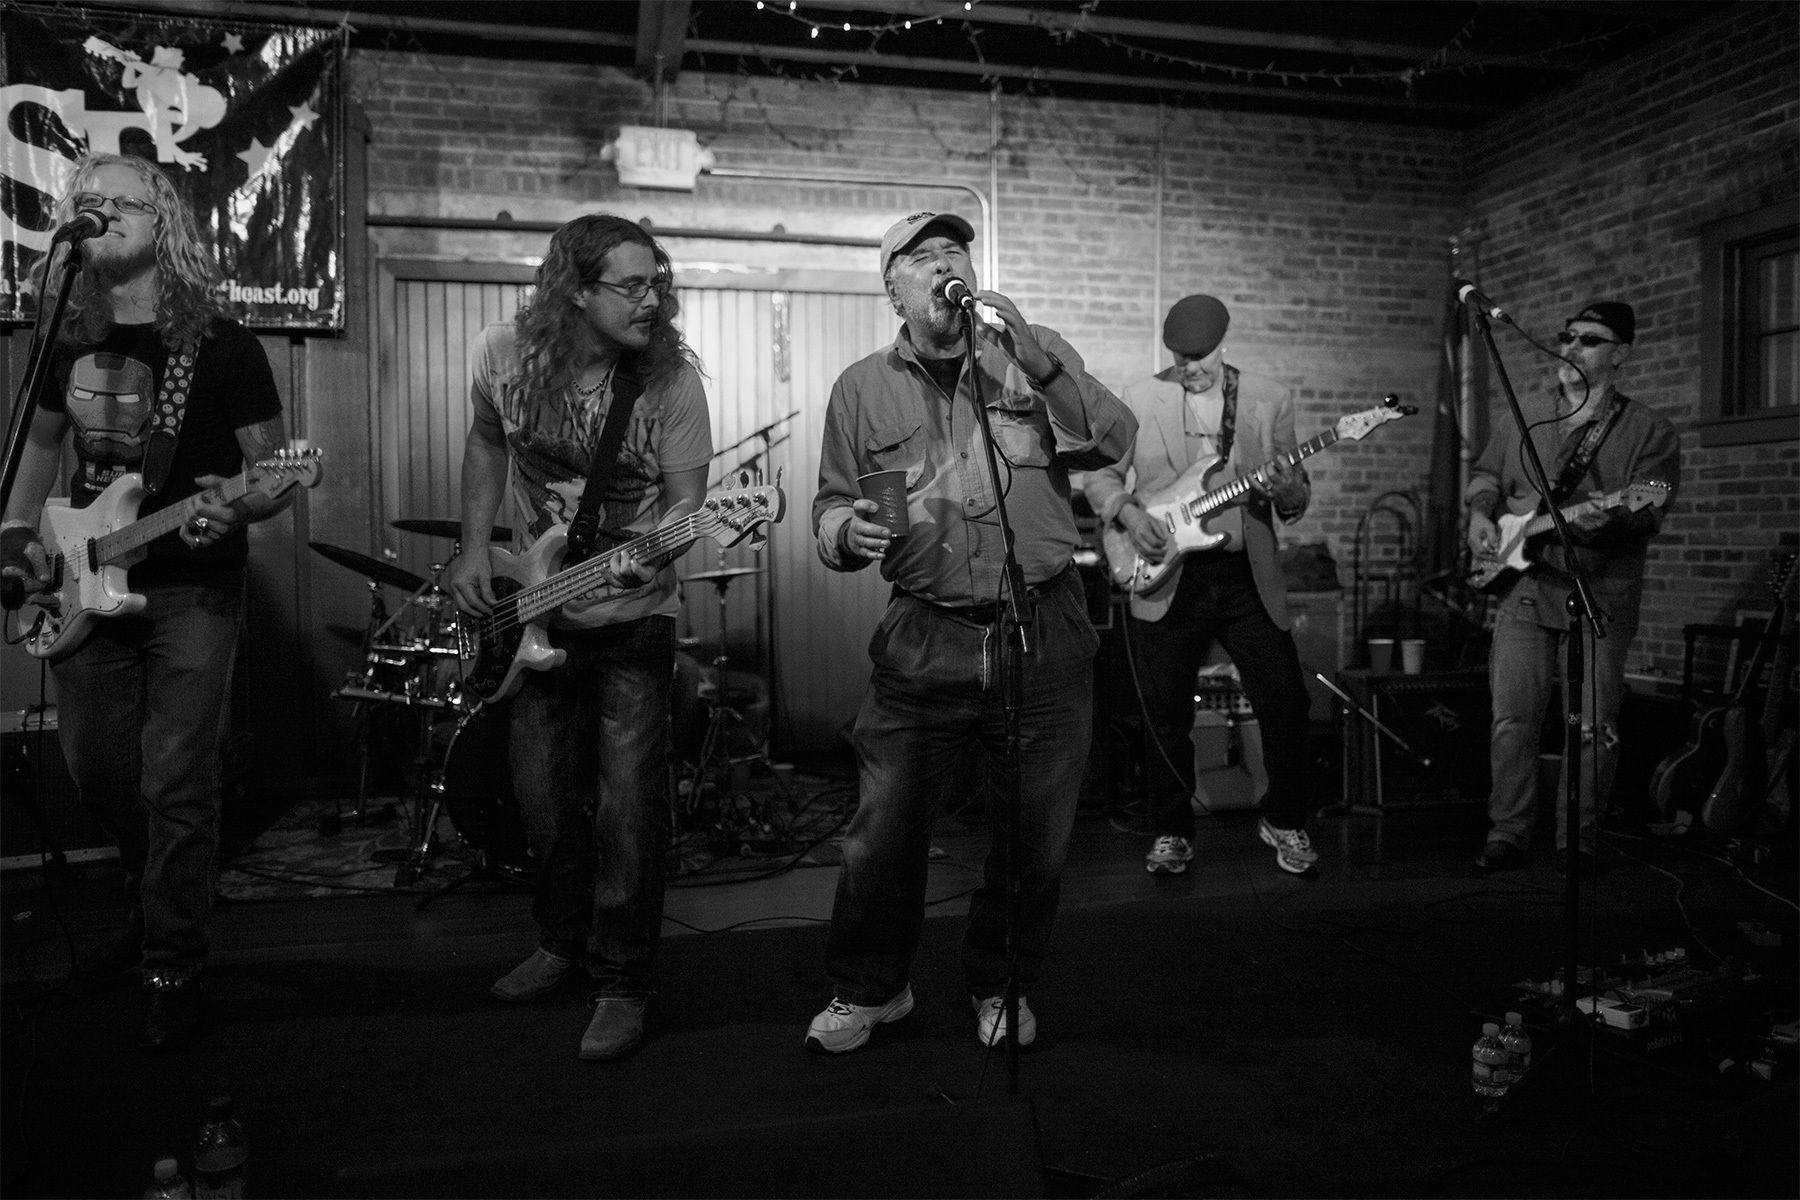 Former SXSE president and show MC Sam Hanniford (C) performs with the band Hott with Harry Leggs at the SXSE show on November 16, 2013.